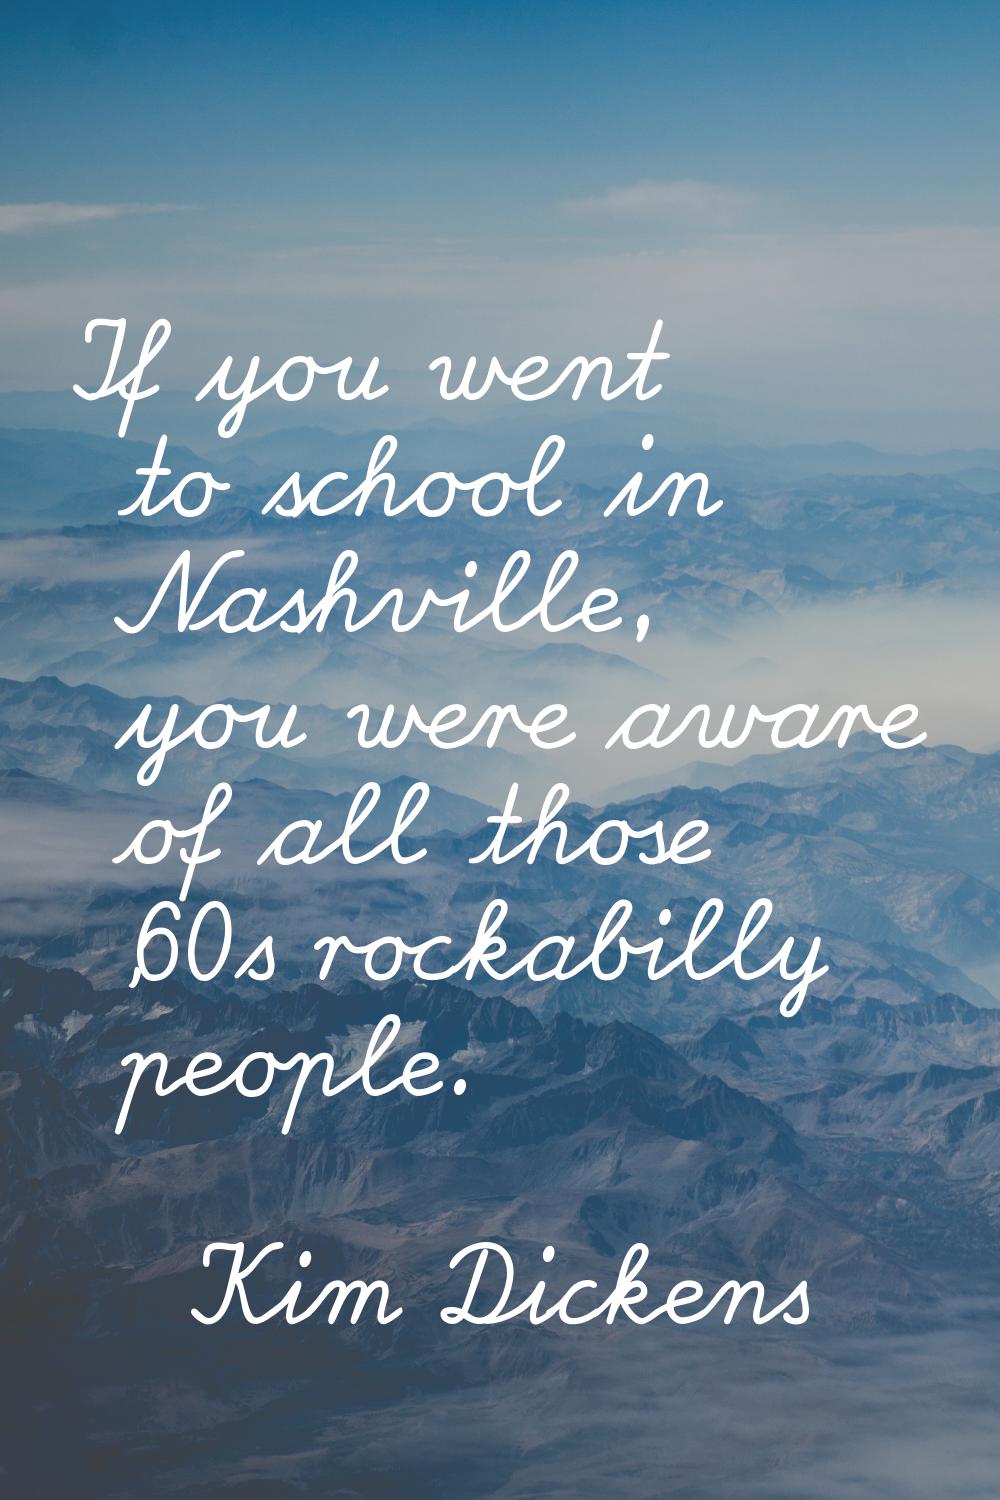 If you went to school in Nashville, you were aware of all those '60s rockabilly people.